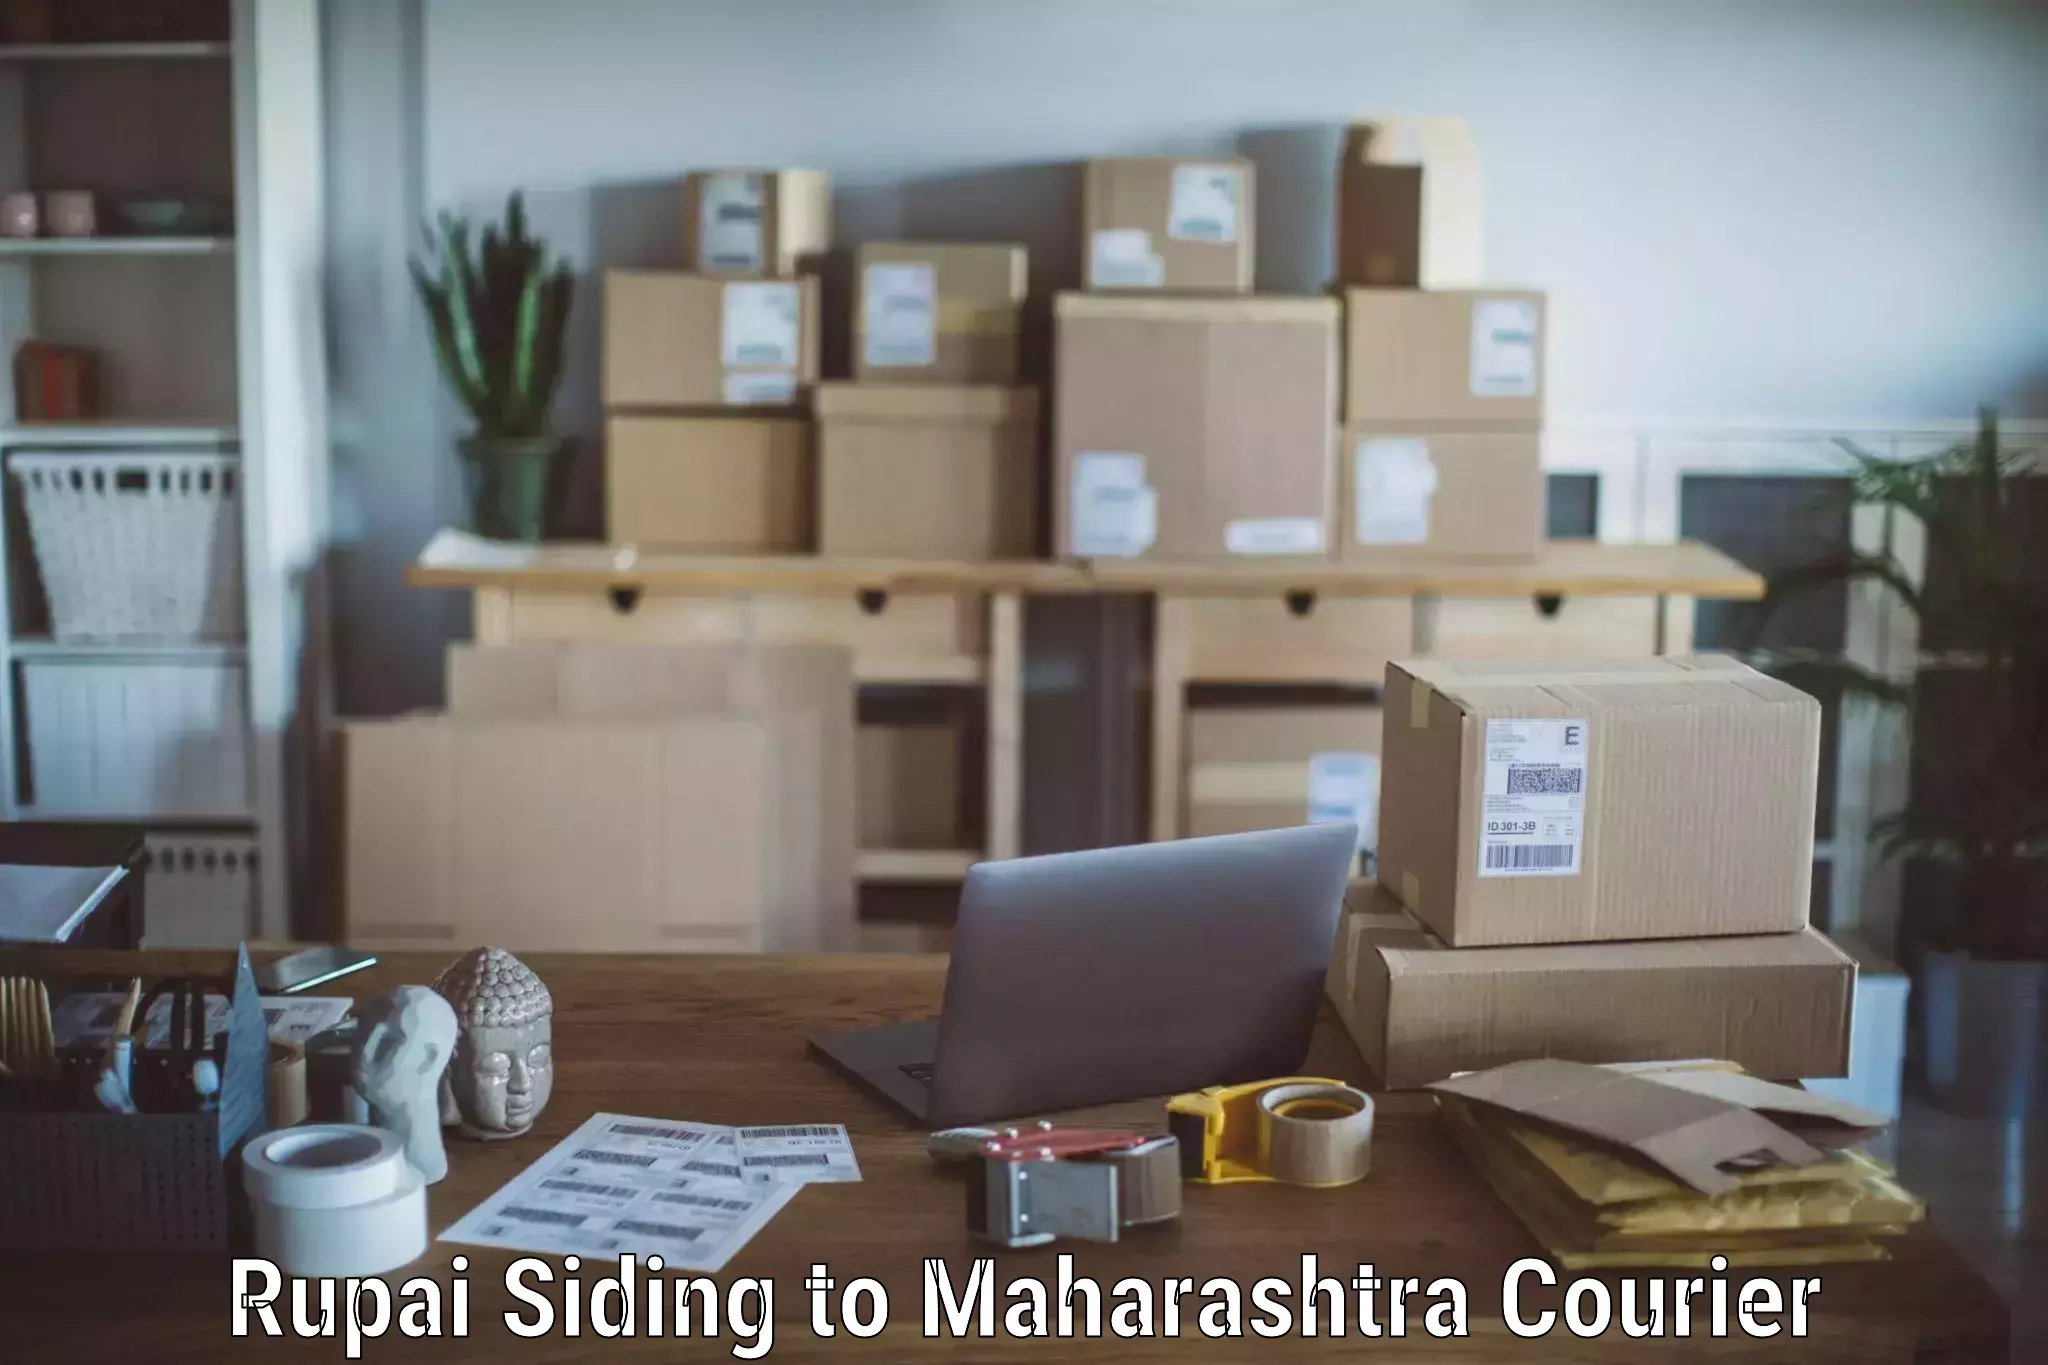 Comprehensive moving services in Rupai Siding to Mahabaleshwar